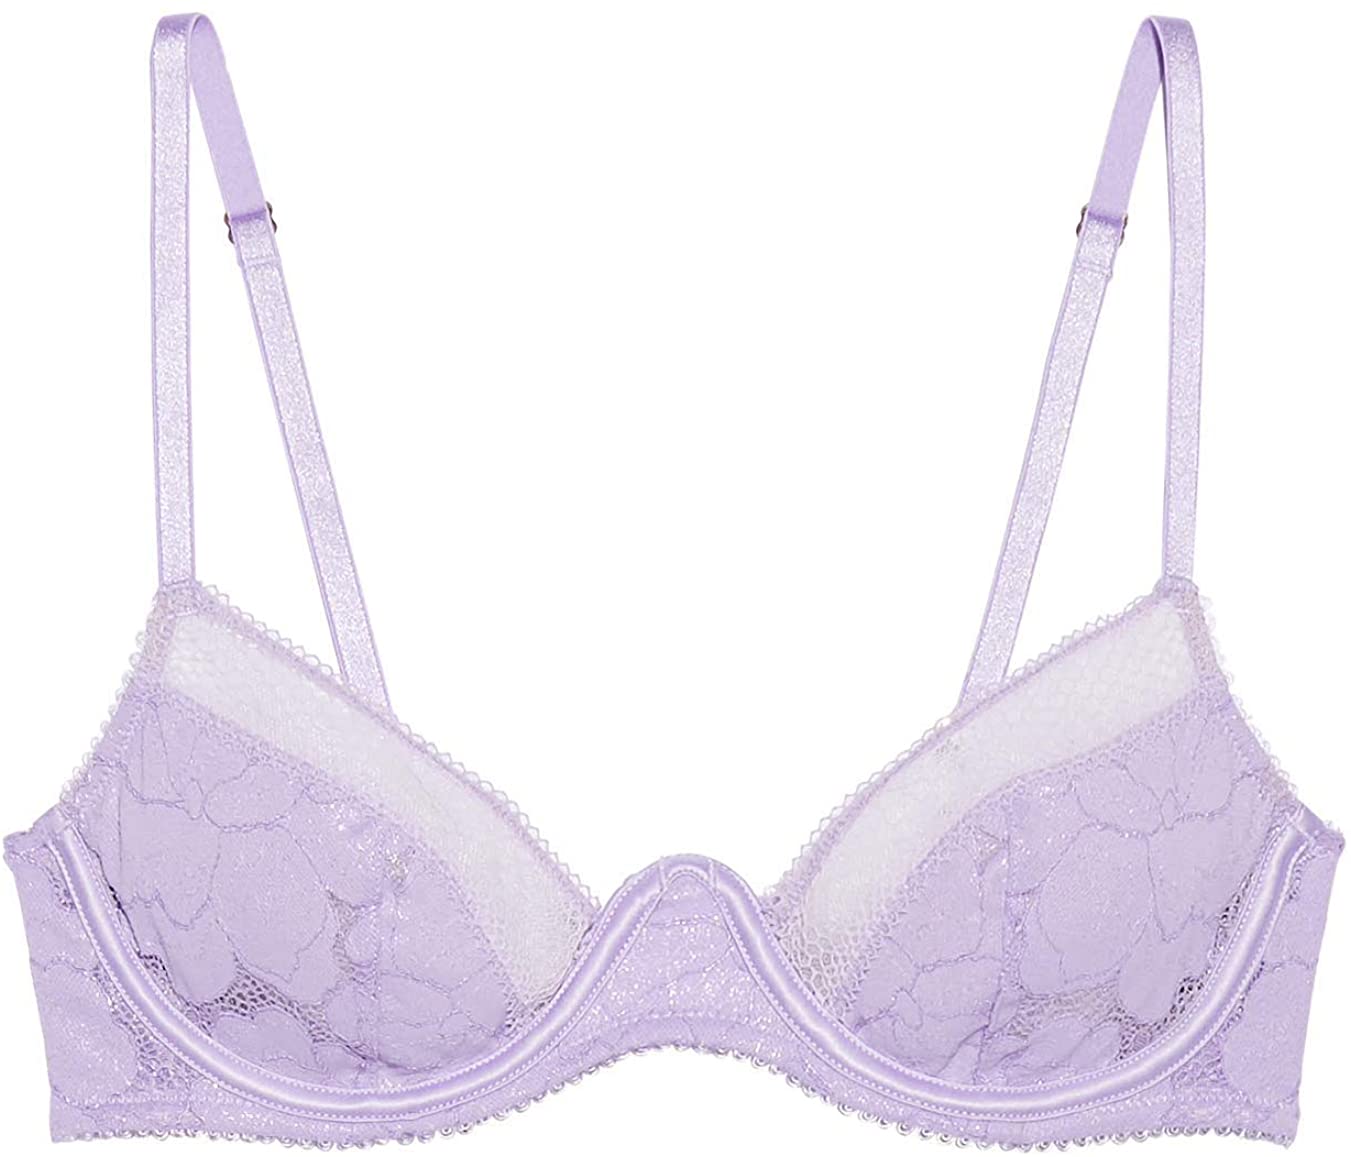 Savage Fenty Sexy Lingerie Floral Lace Unlined Bra with X Charm - 34DD,  Women's Fashion, New Undergarments & Loungewear on Carousell